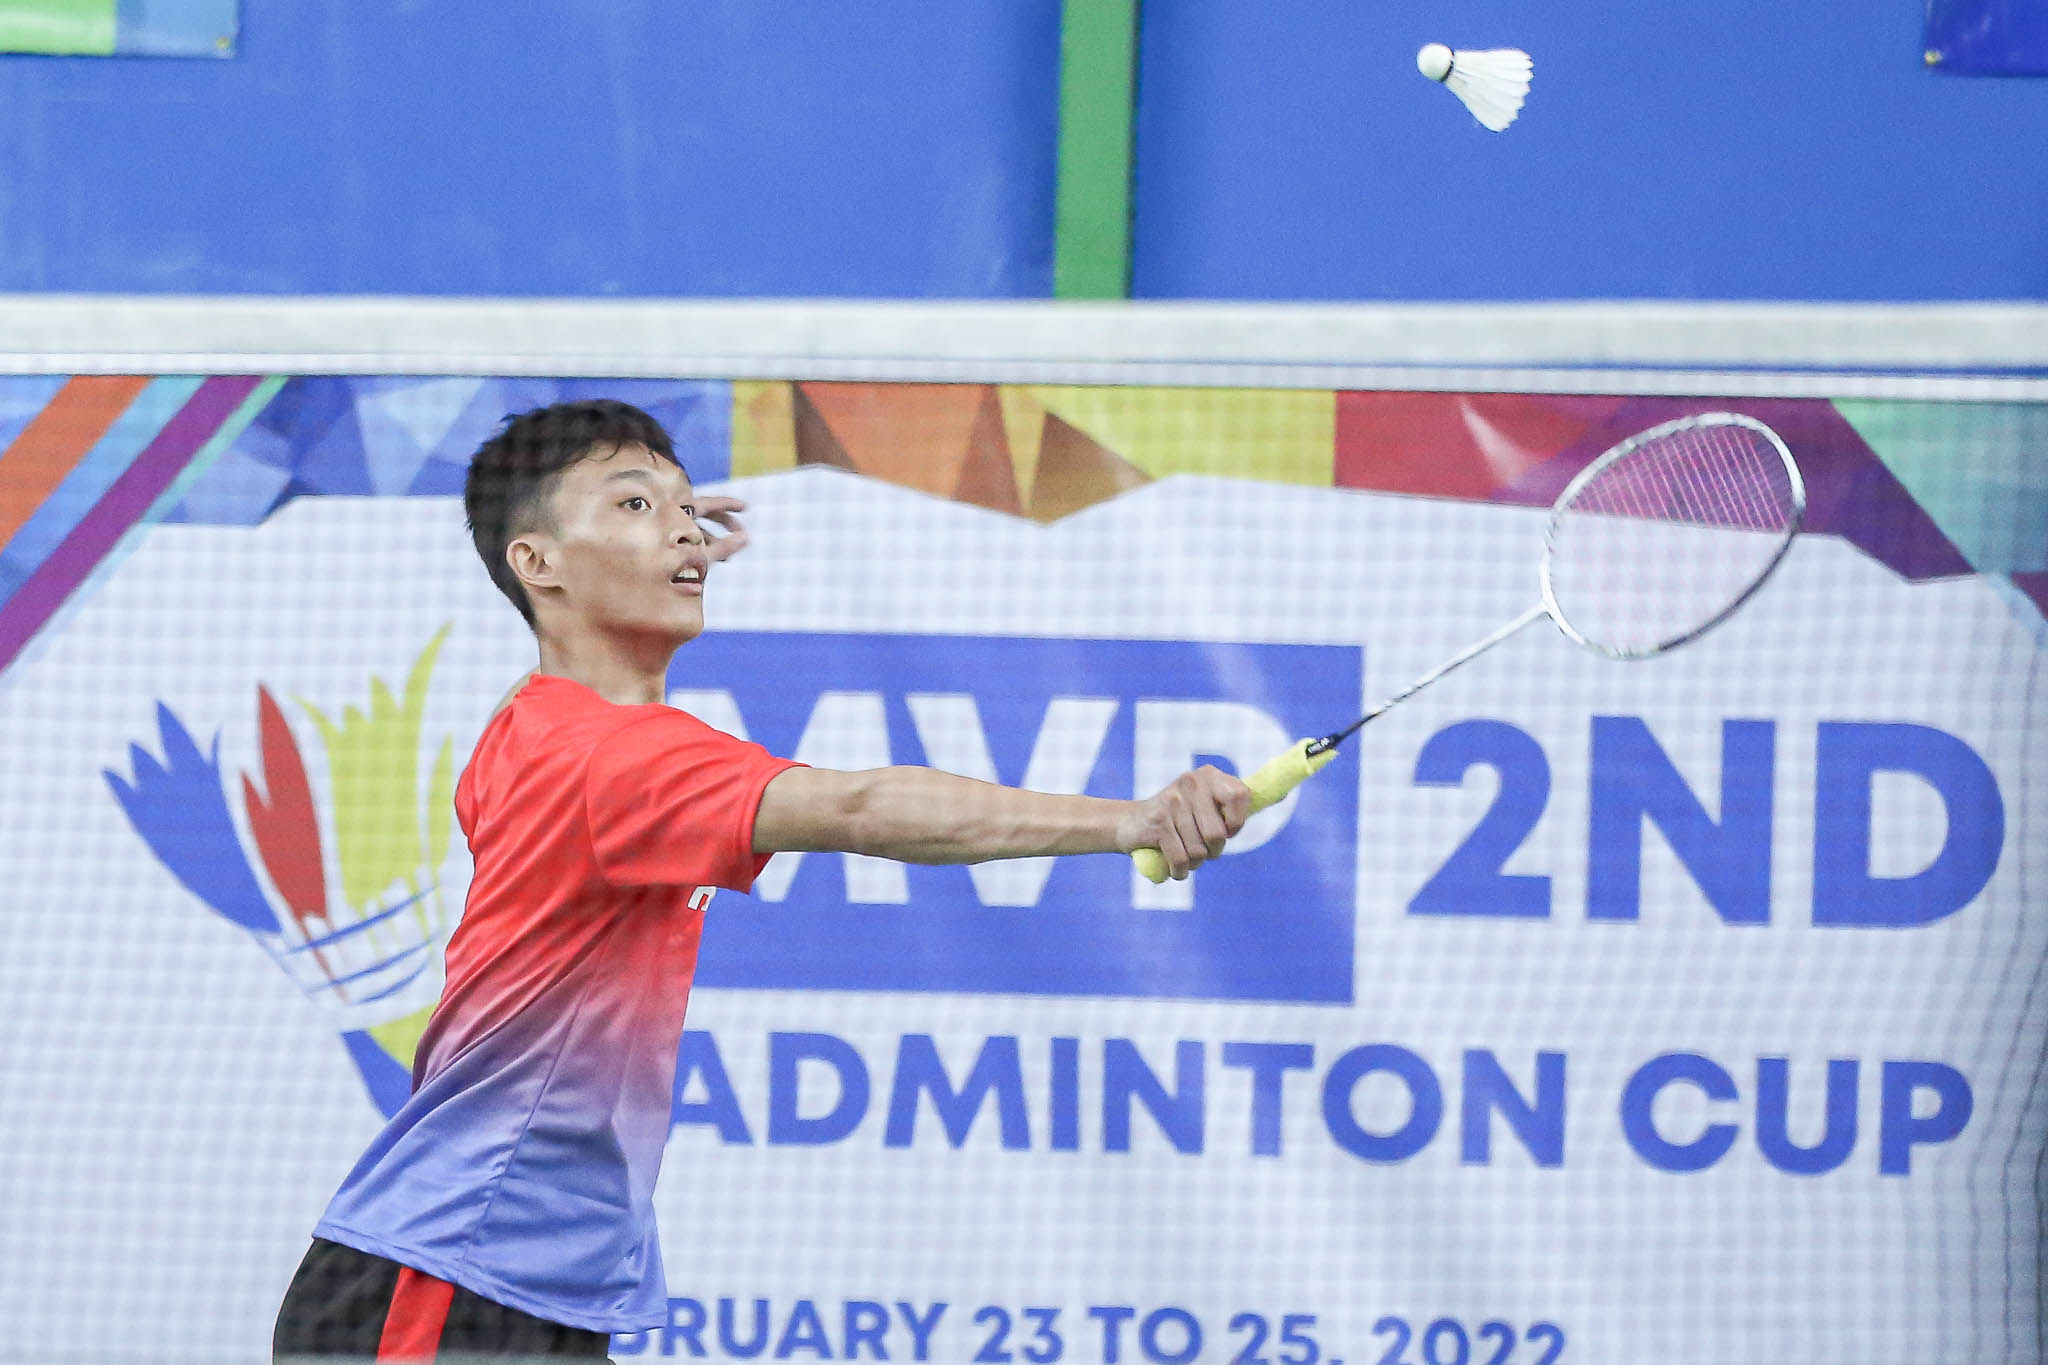 2nd-MVP-Badminton-Cup-Day-3-Albo-3 Smash head coach impressed by next gen of PH shuttlers 2021 SEA Games Badminton News  - philippine sports news